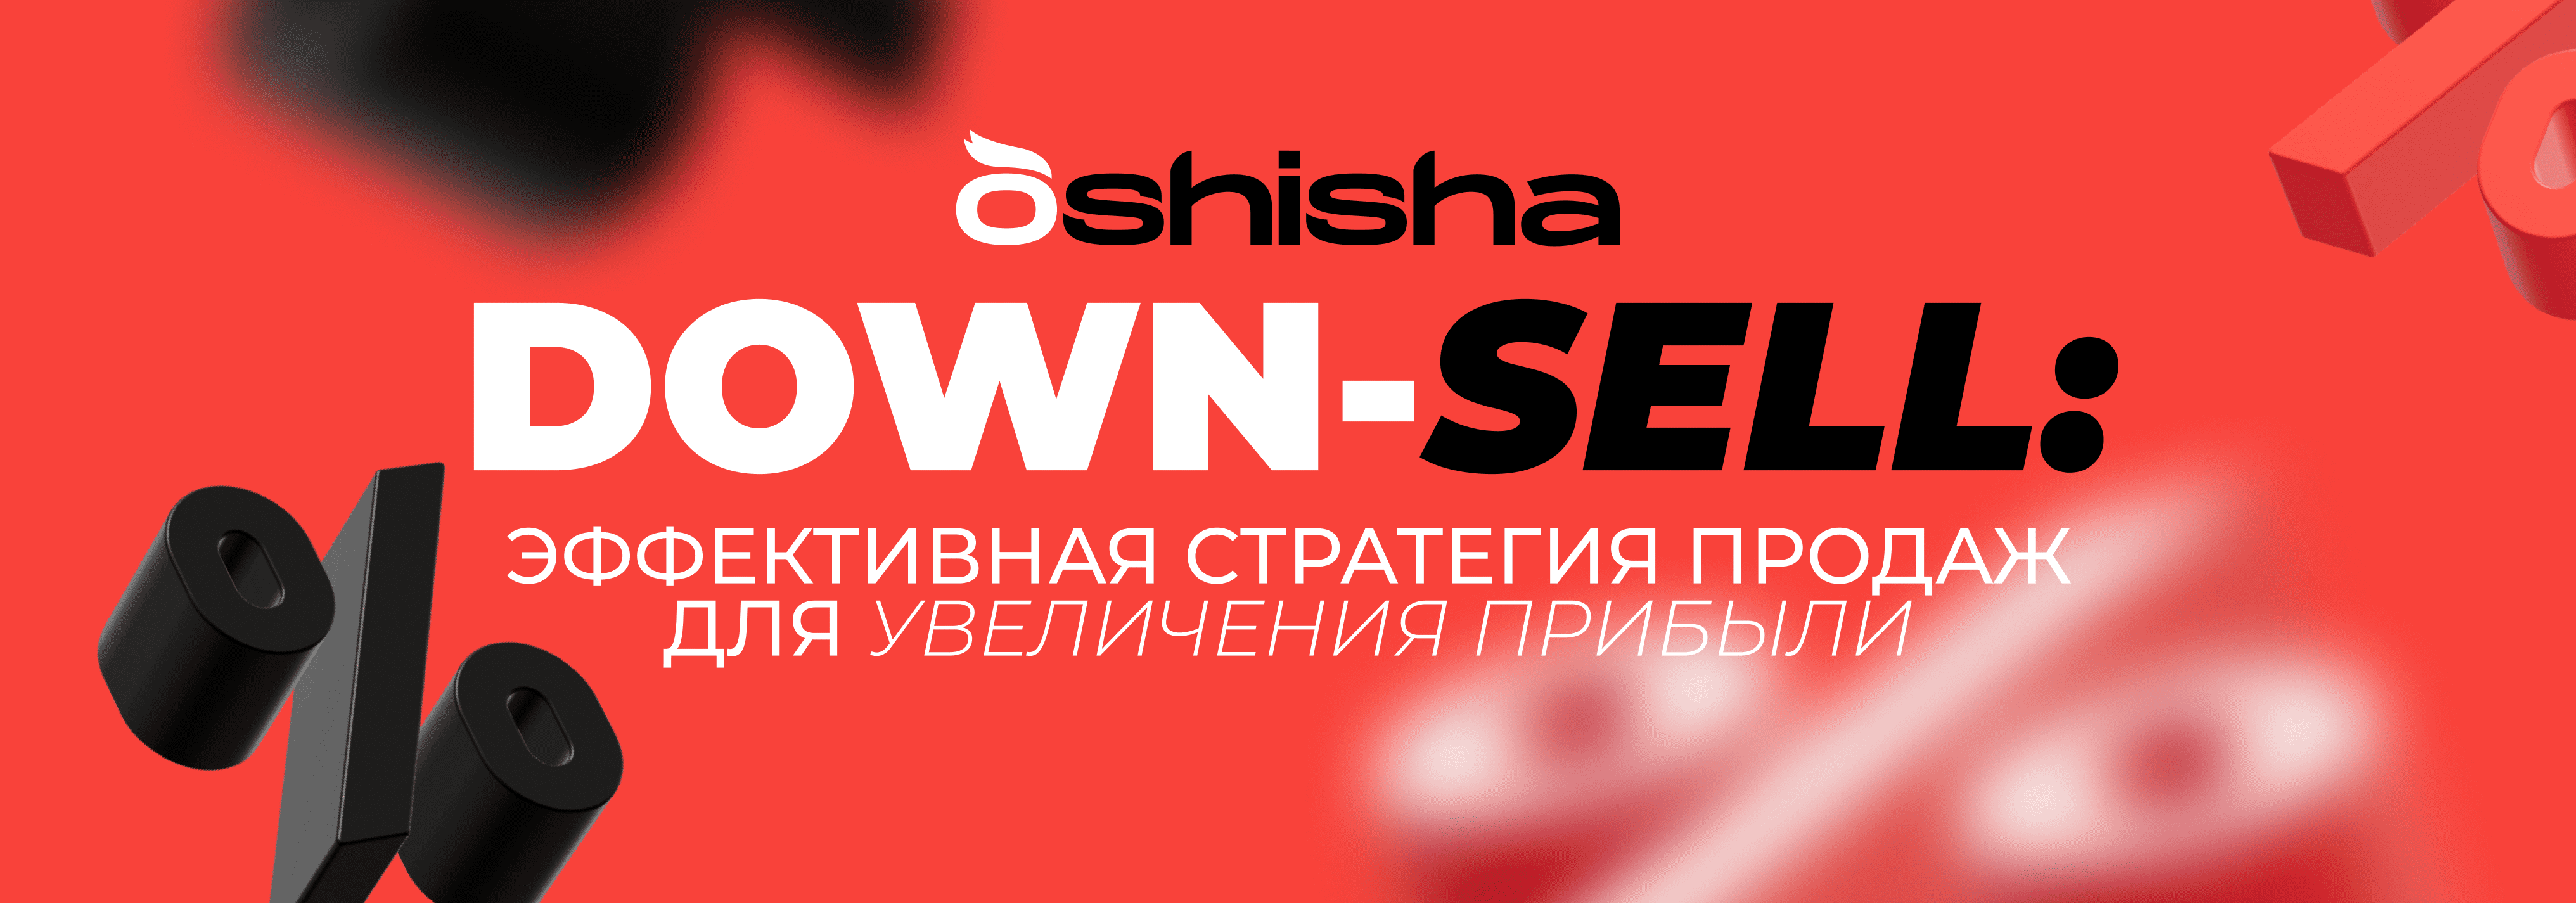 DOWN-SELL